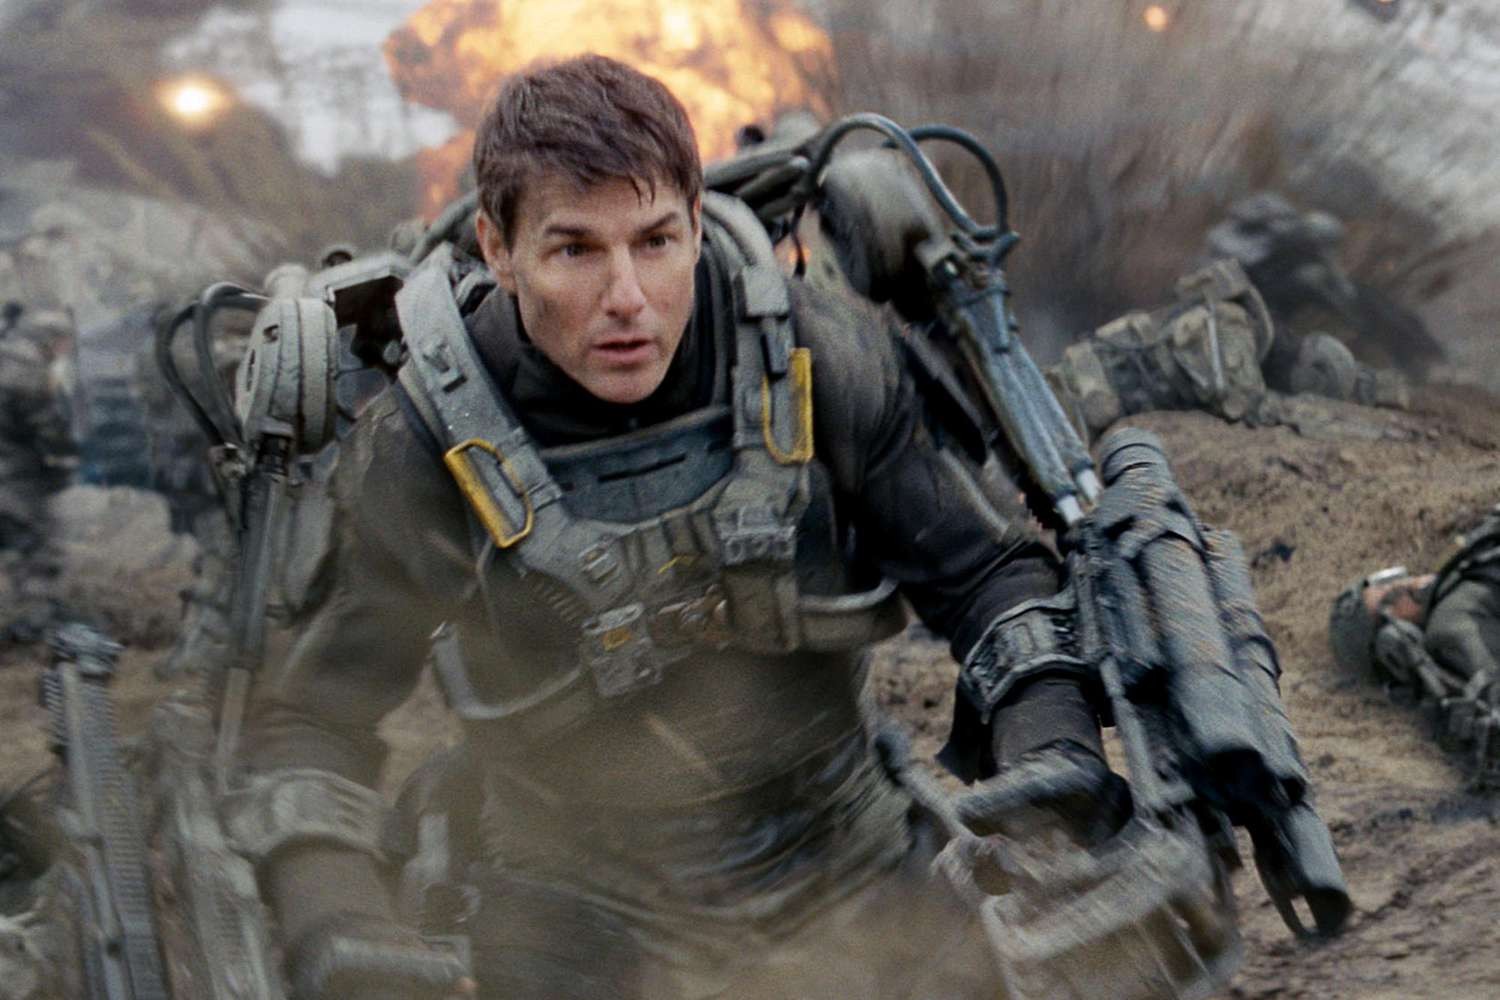 Tom Cruise in a still from Edge of Tomorrow